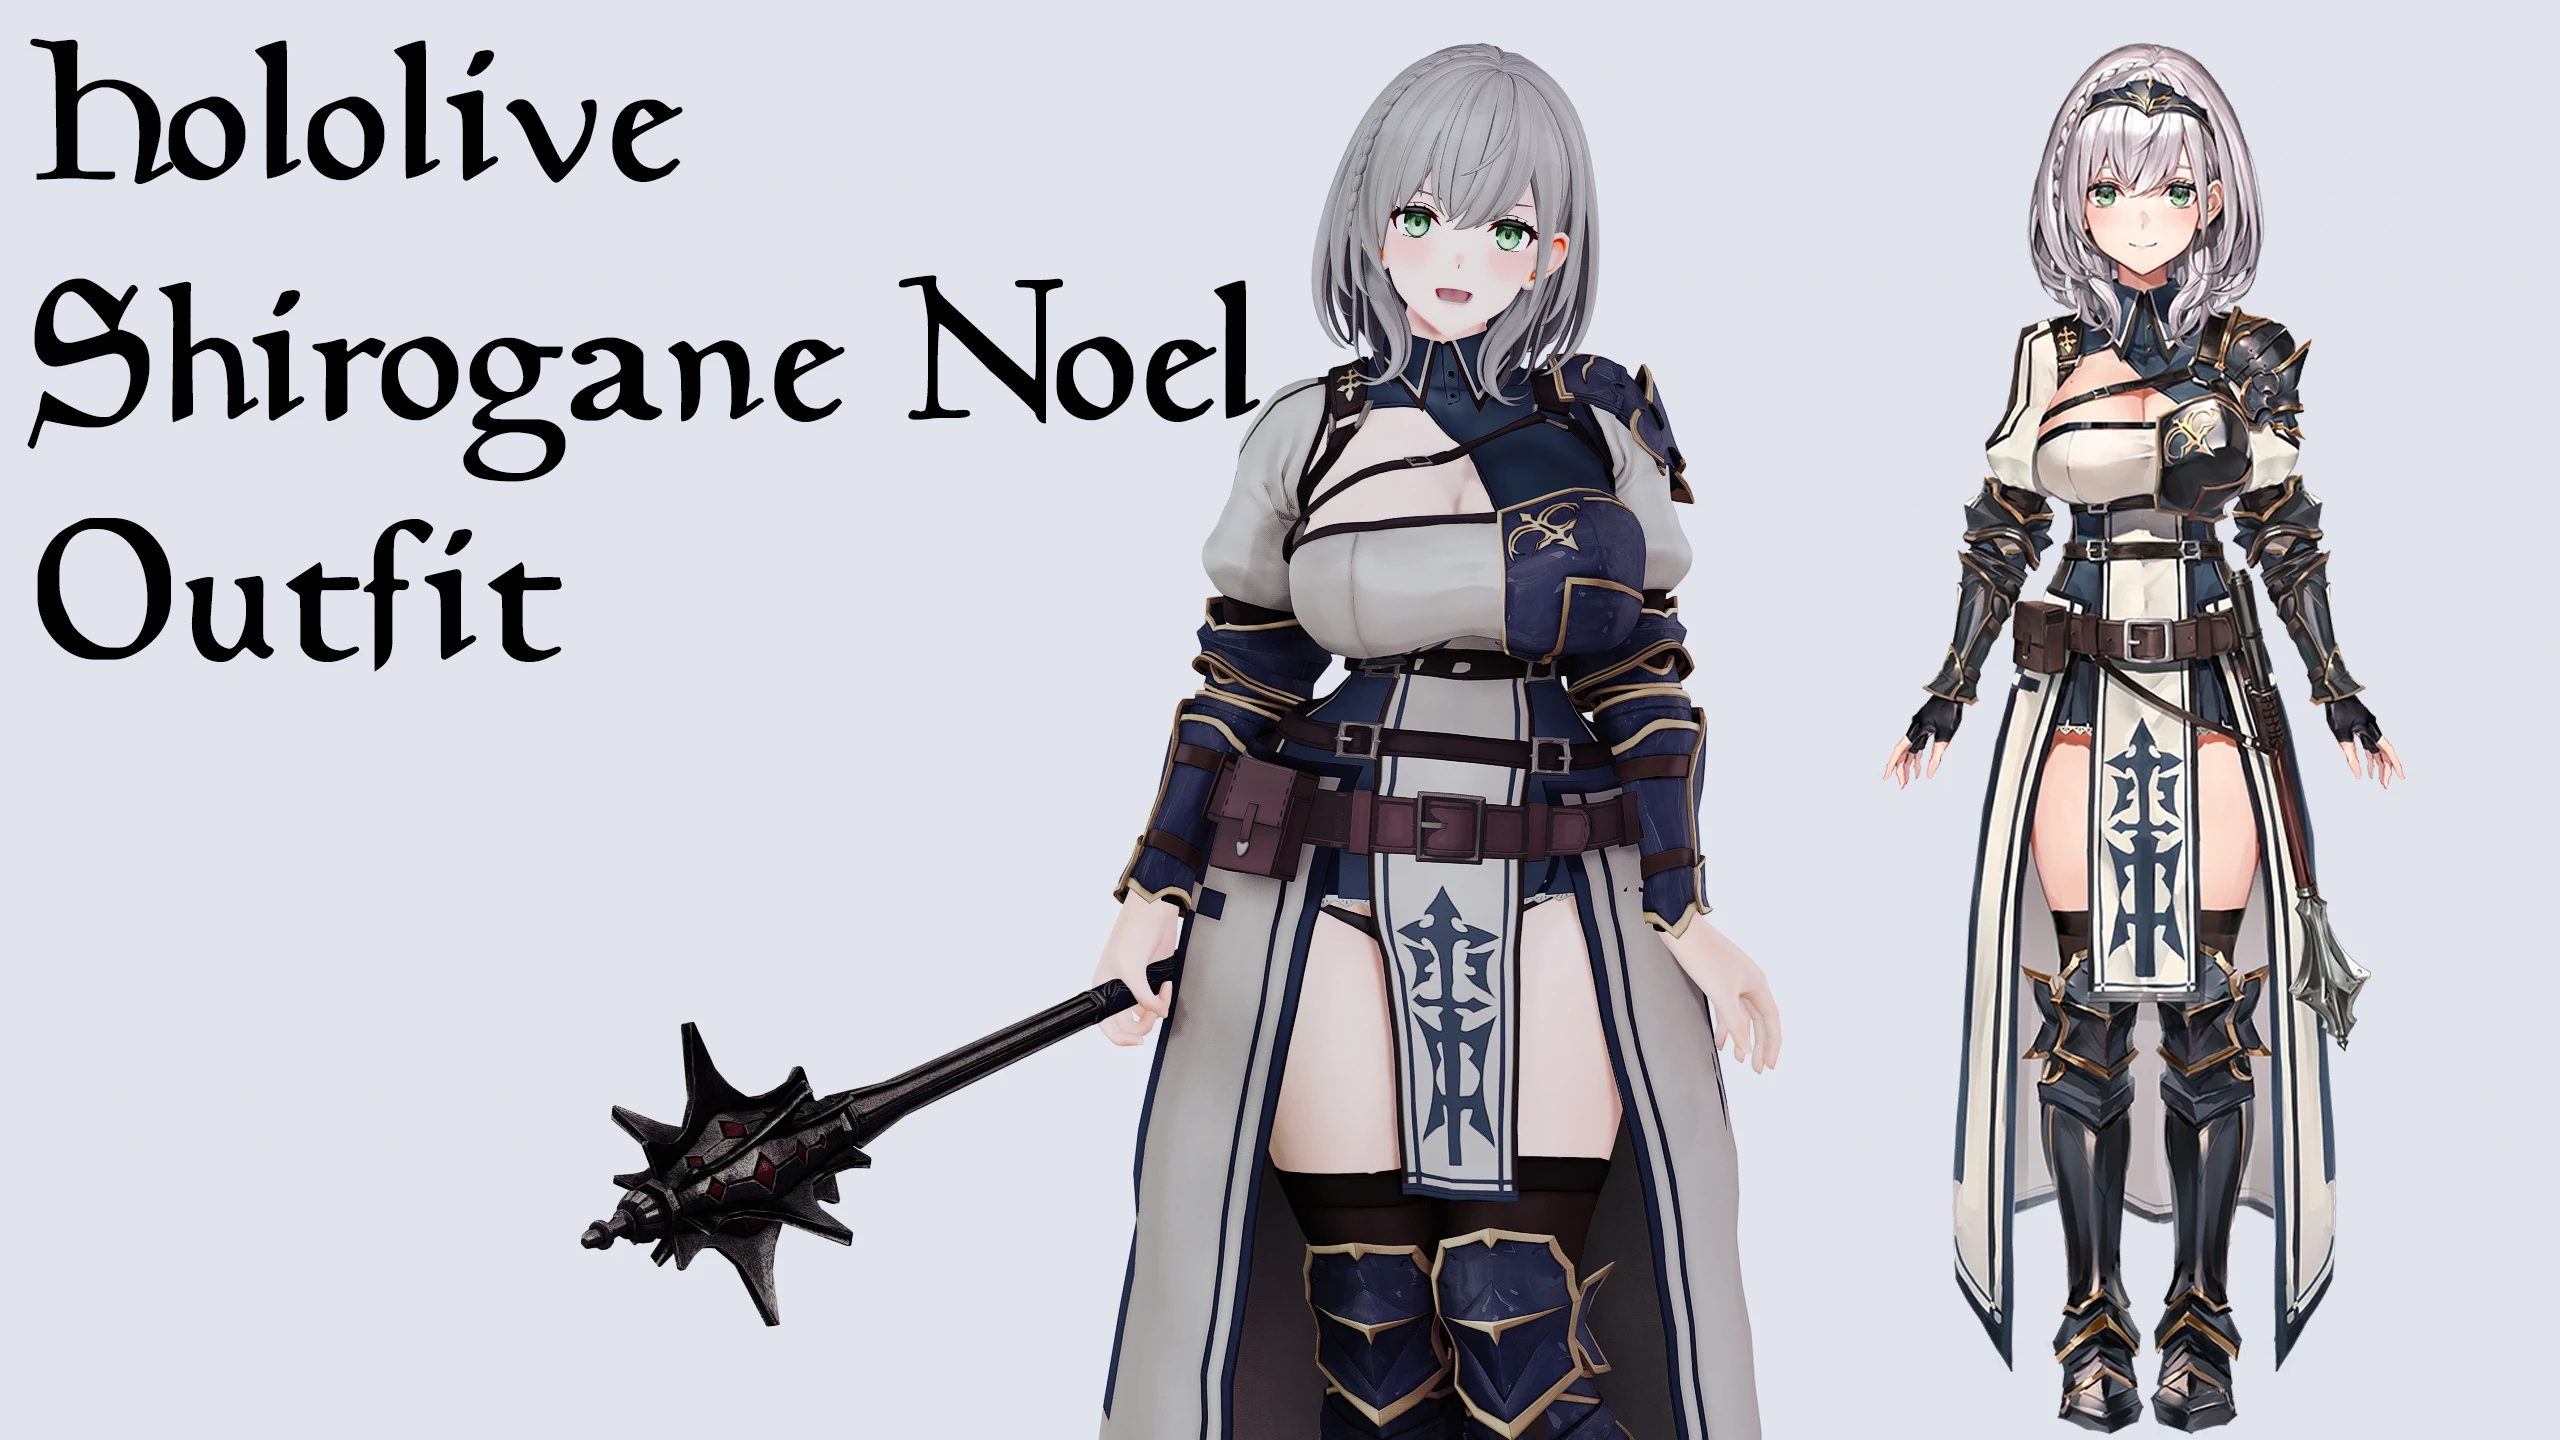 Hololive Shirogane Noel Outfit